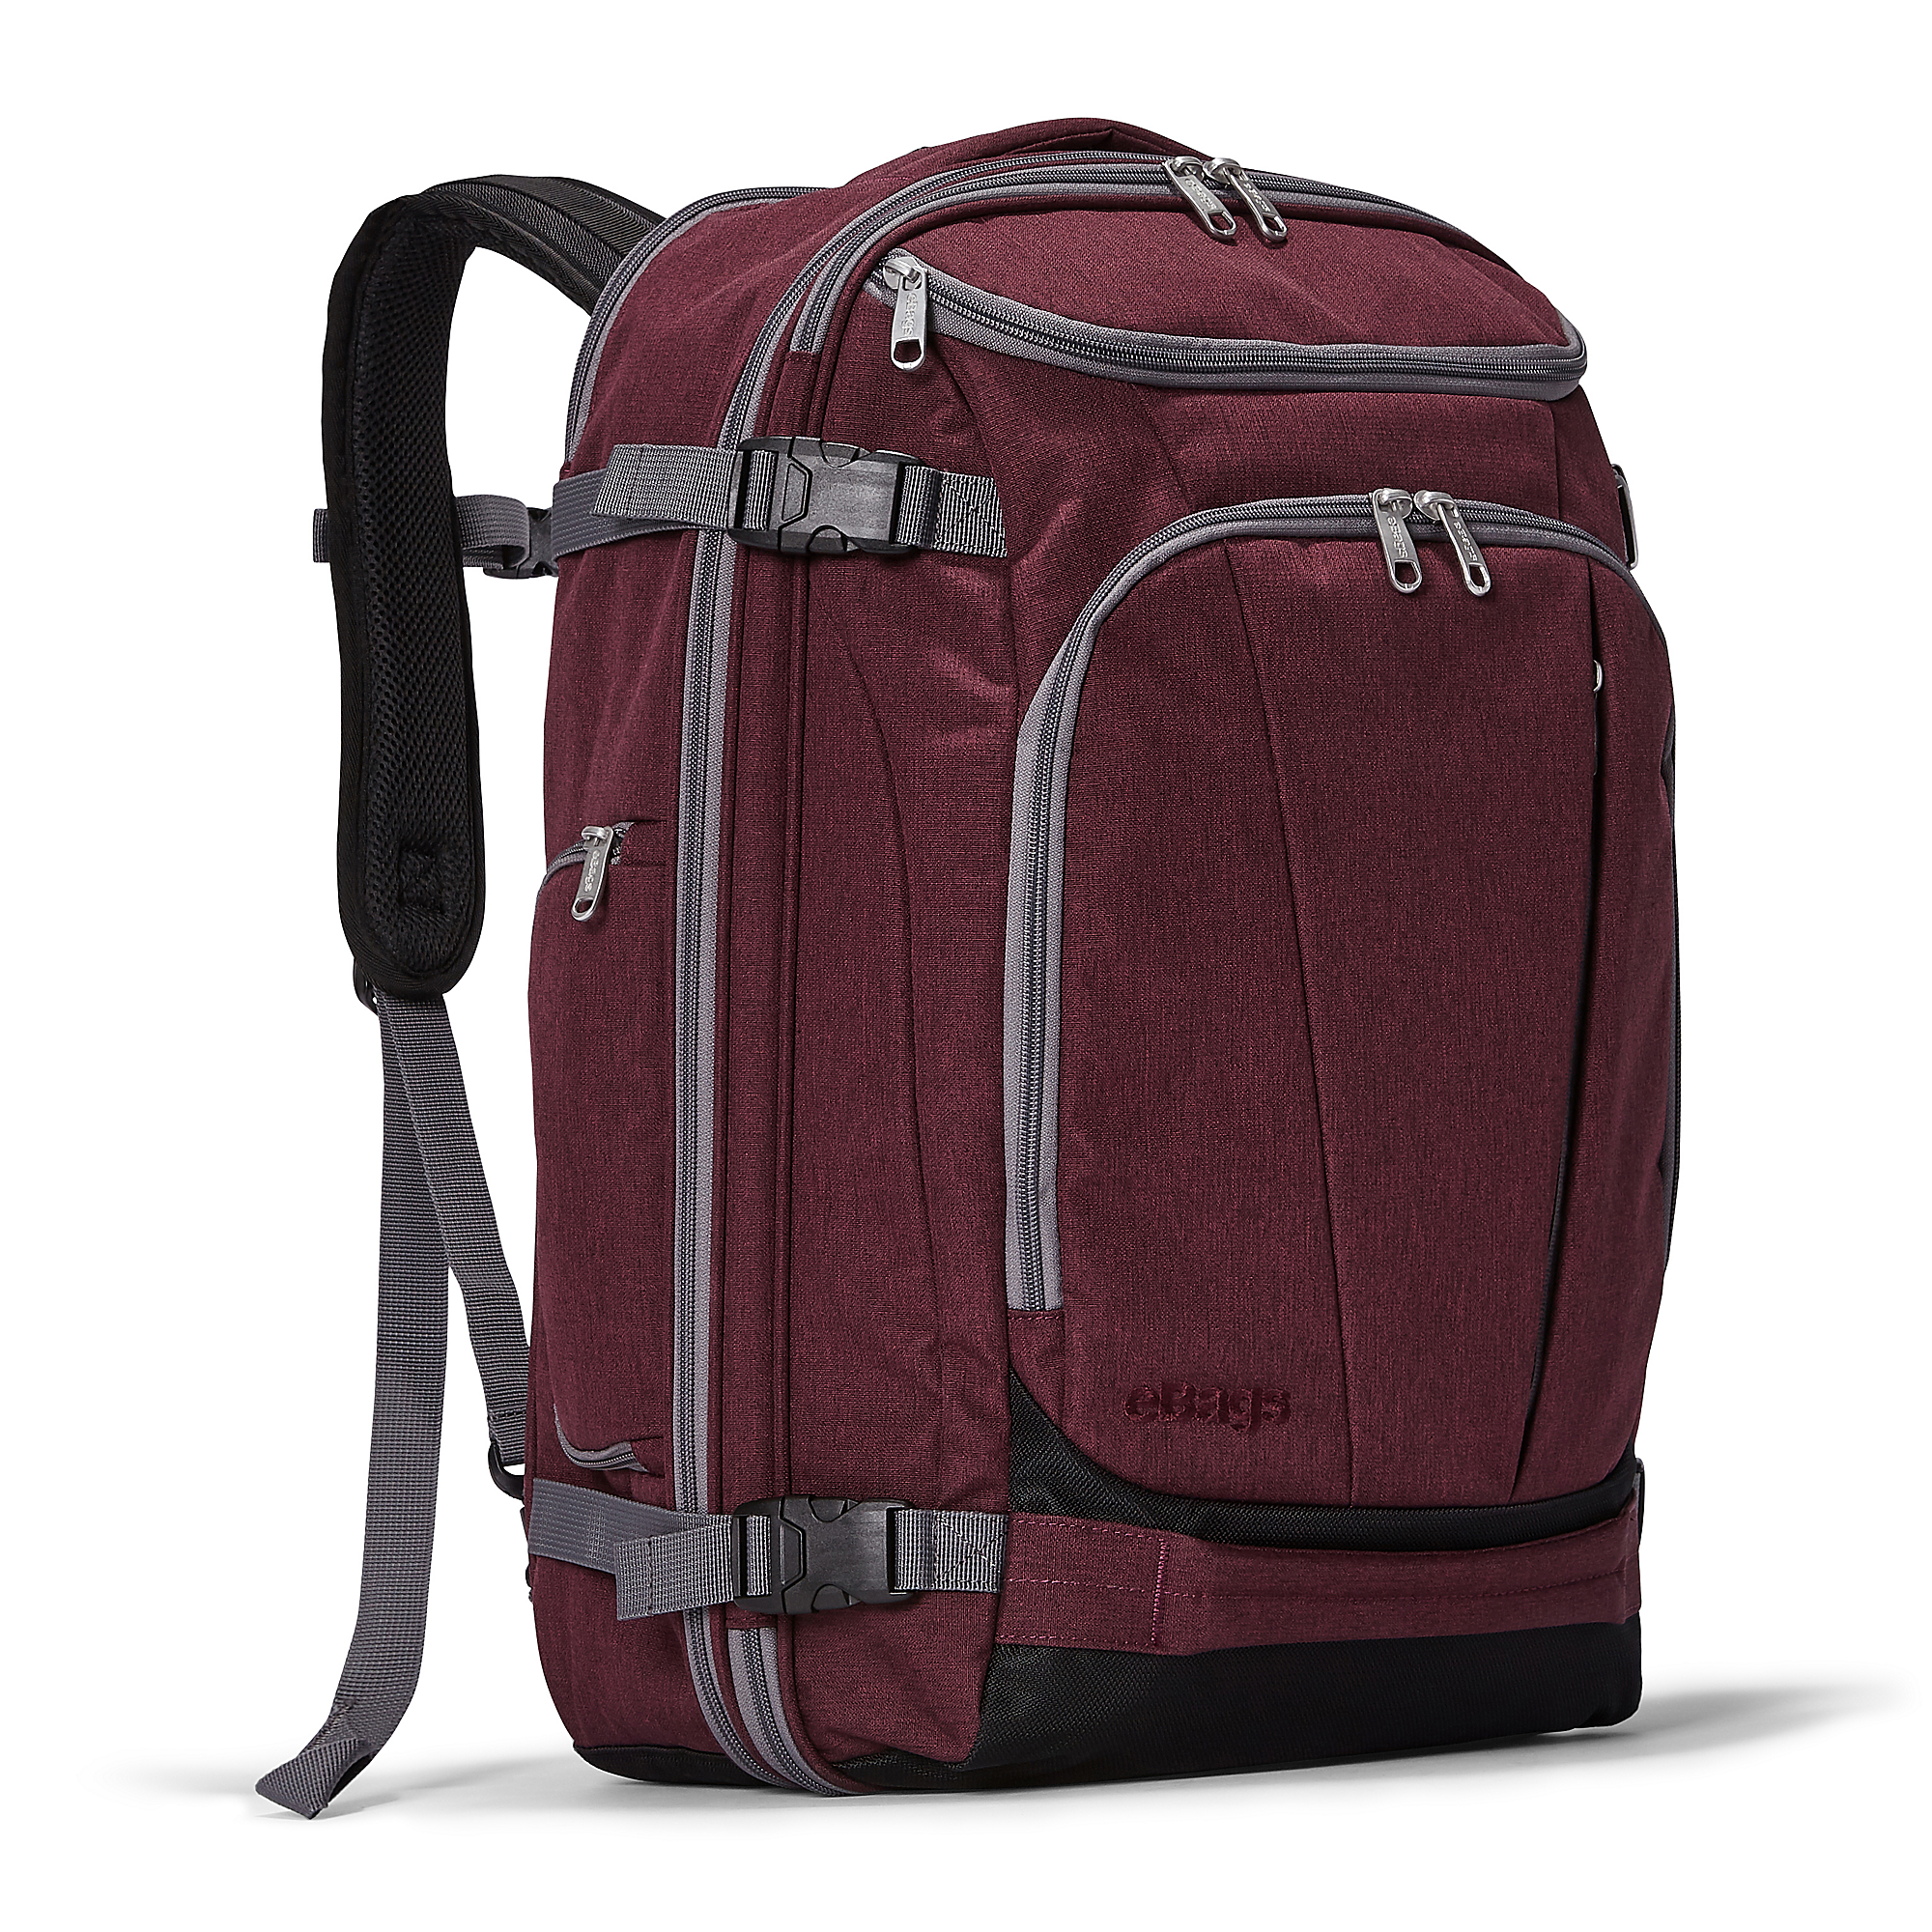 eBags Mother Lode Travel Backpack Front View